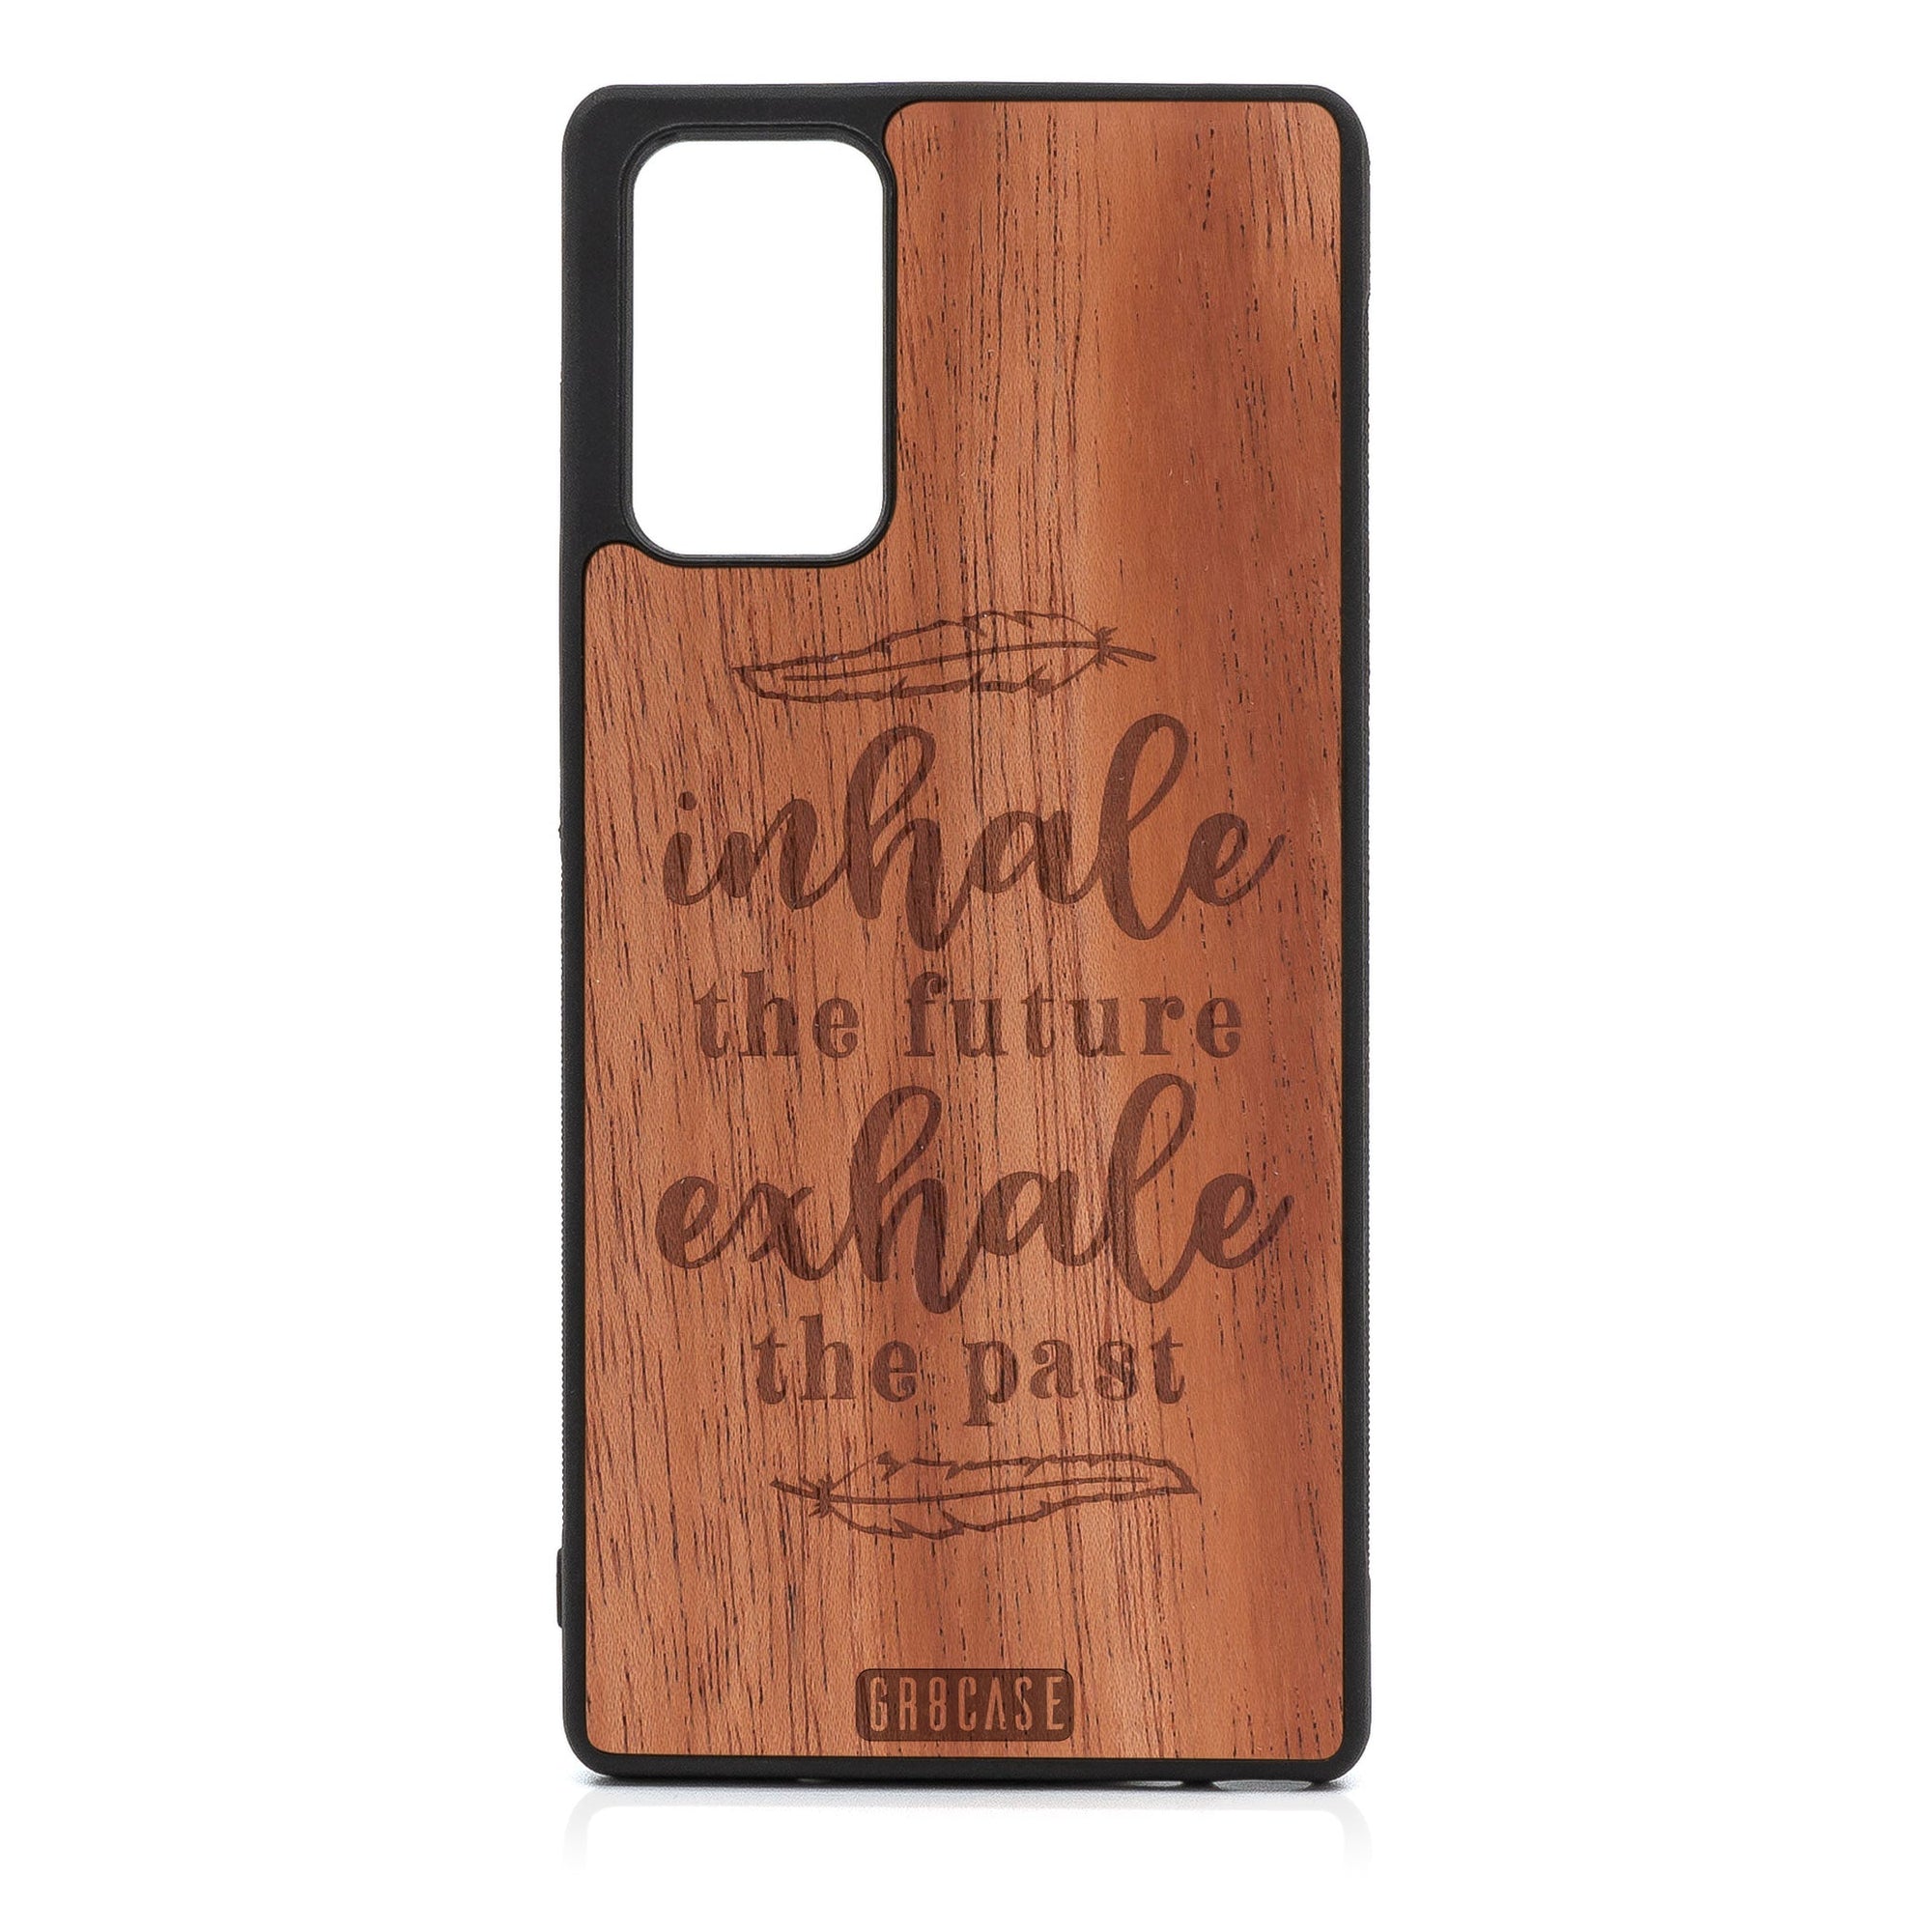 Inhale The Future Exhale The Past Design Wood Case For Samsung Galaxy A52 5G